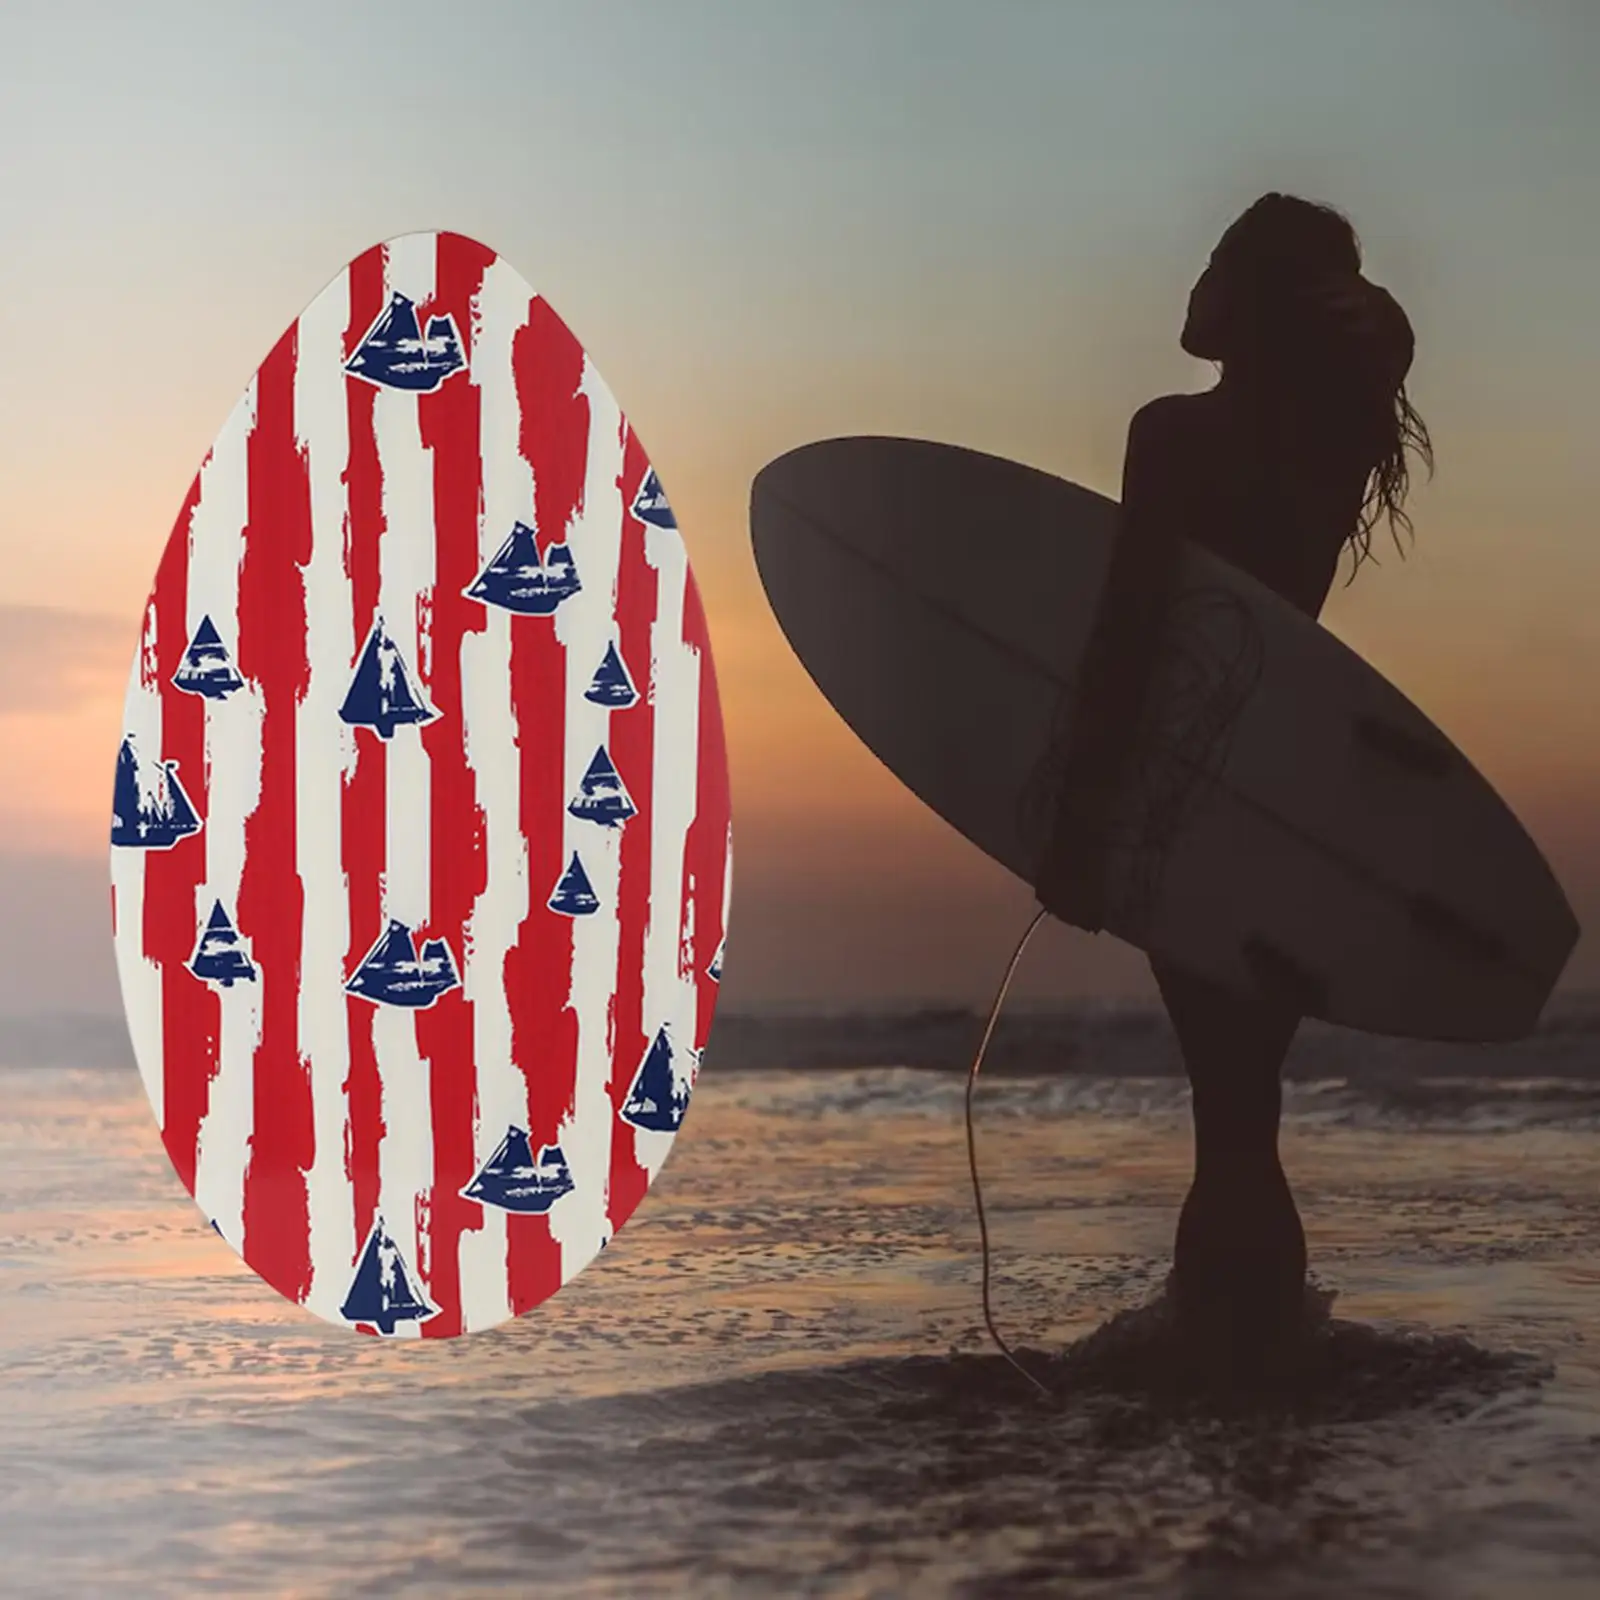 35/41inch Surfing Skimboard Wooden Skim Board Surfboard Water Beach Toys for Performance Deck Adults Sports Outdoors Teenagers